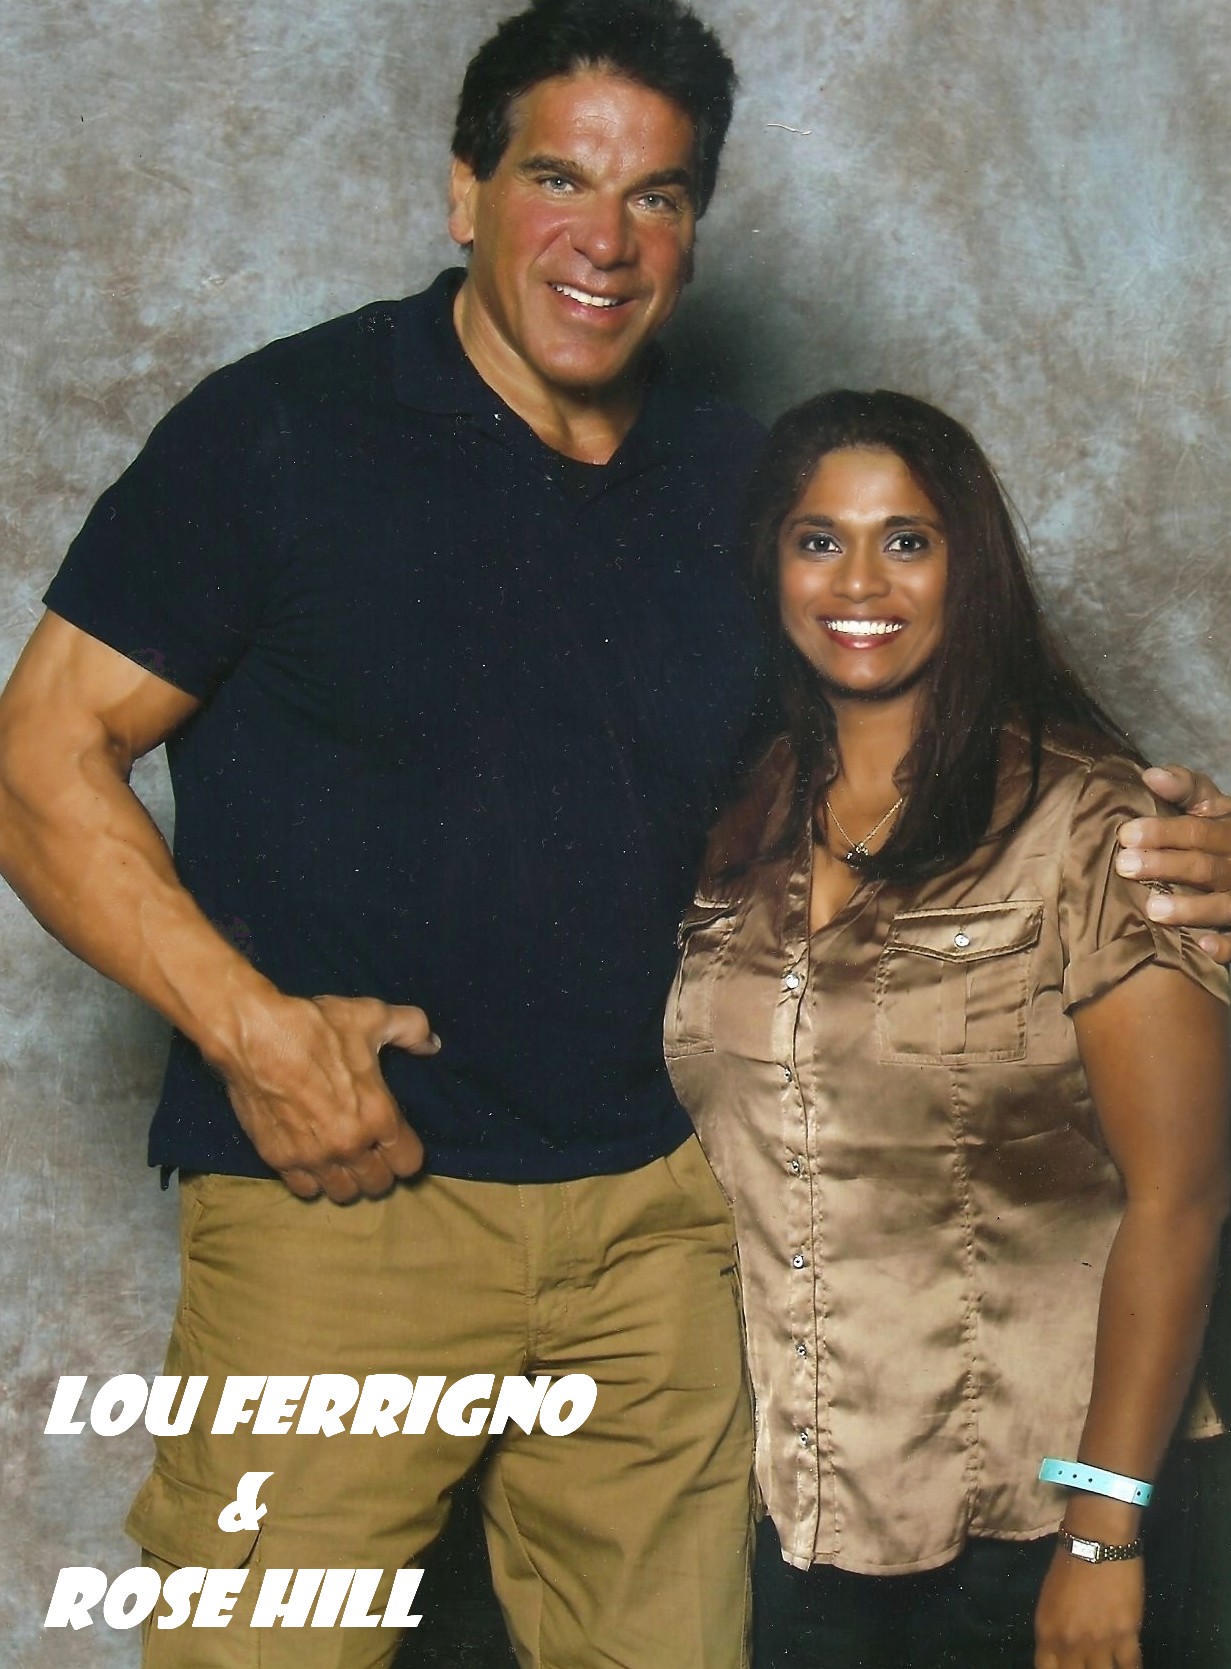 Hollywood Star: Lou Ferrigno and Rose Hill